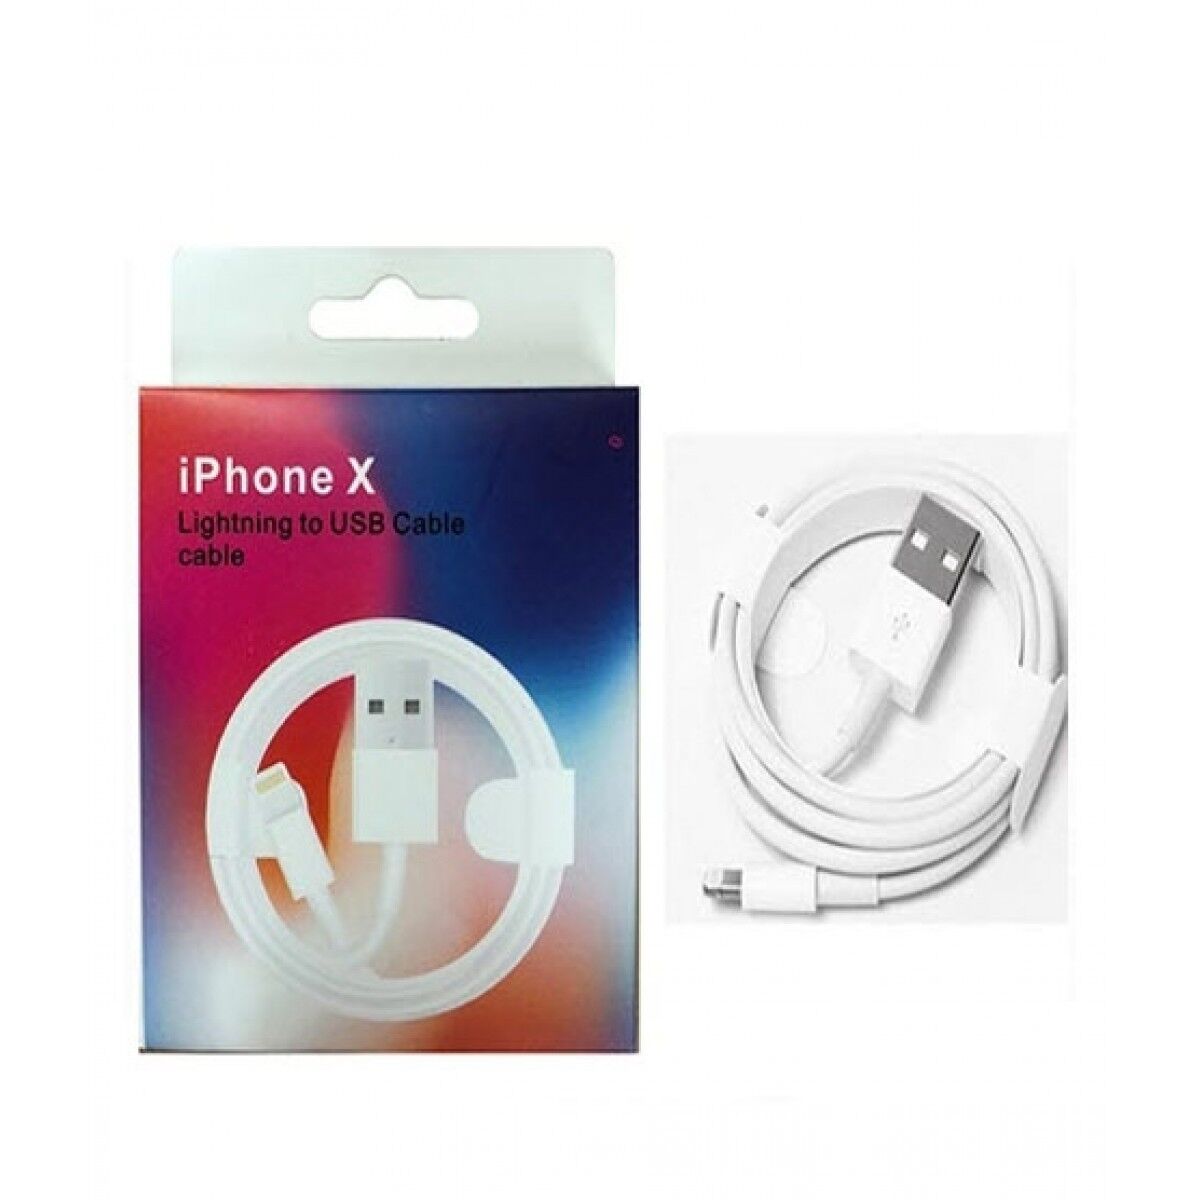 Iphone X Lightning To Usb Cable freeshipping - SmartTech Deals